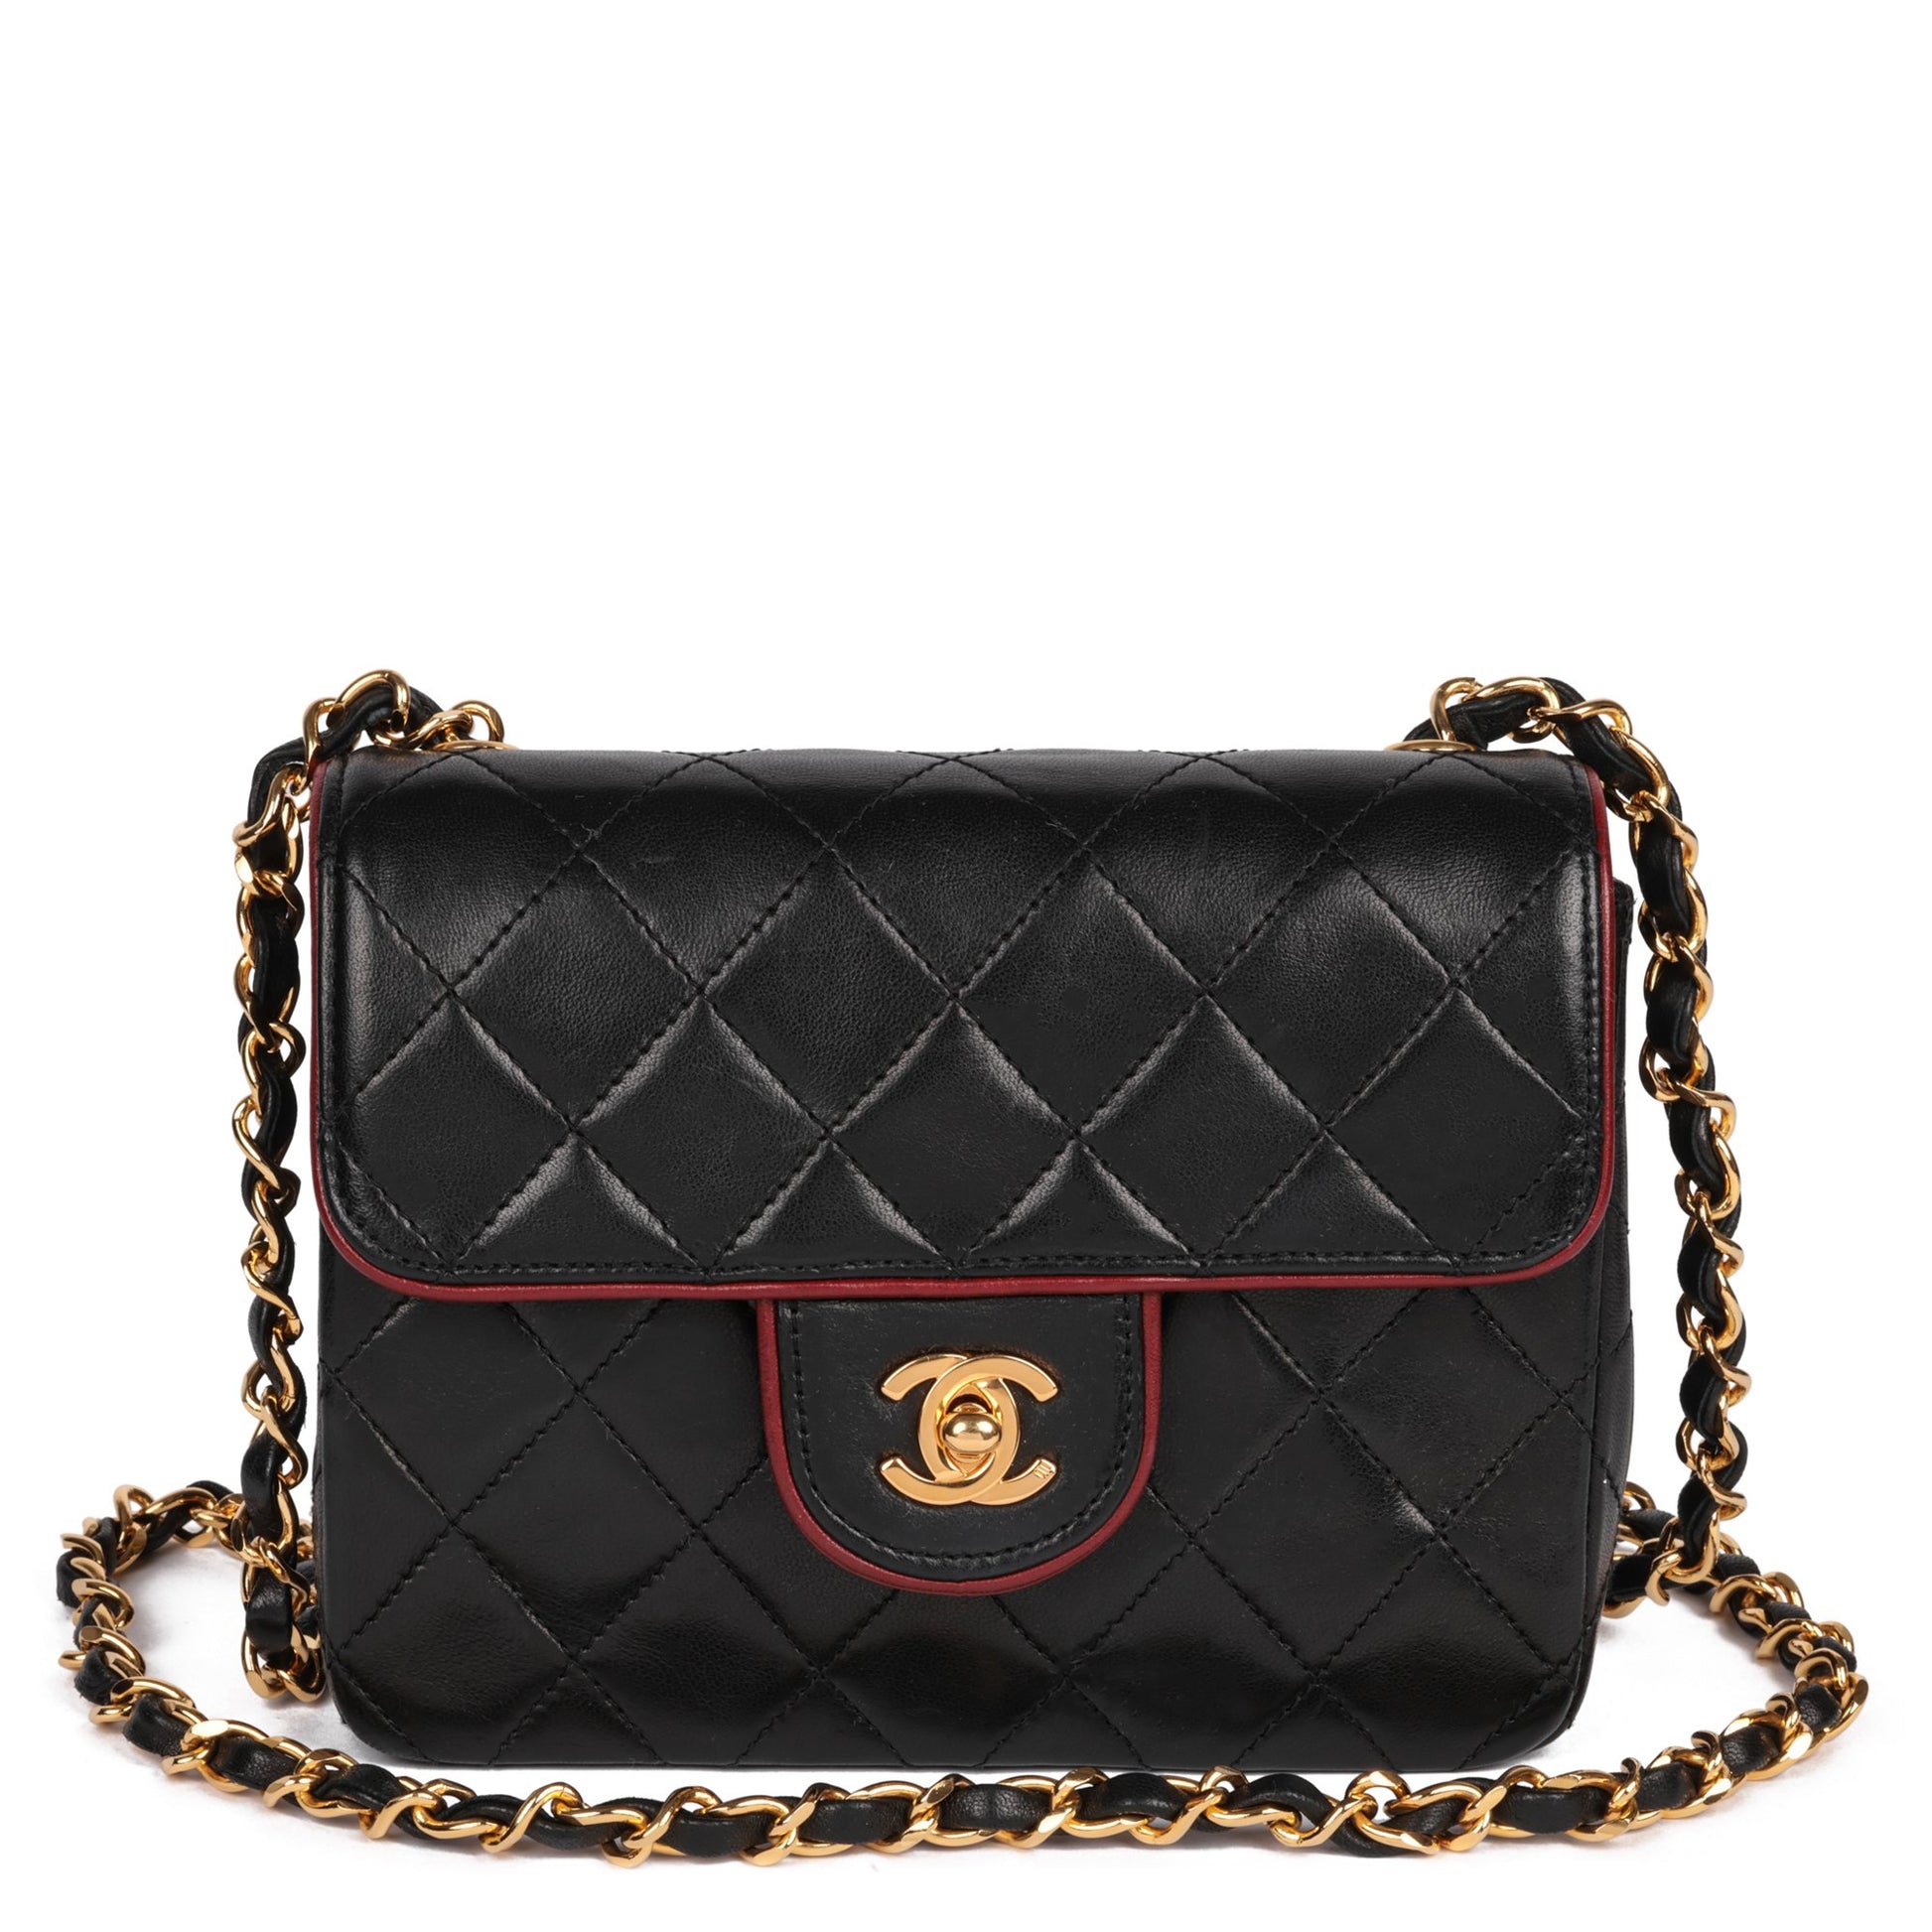 chanel camera bag red